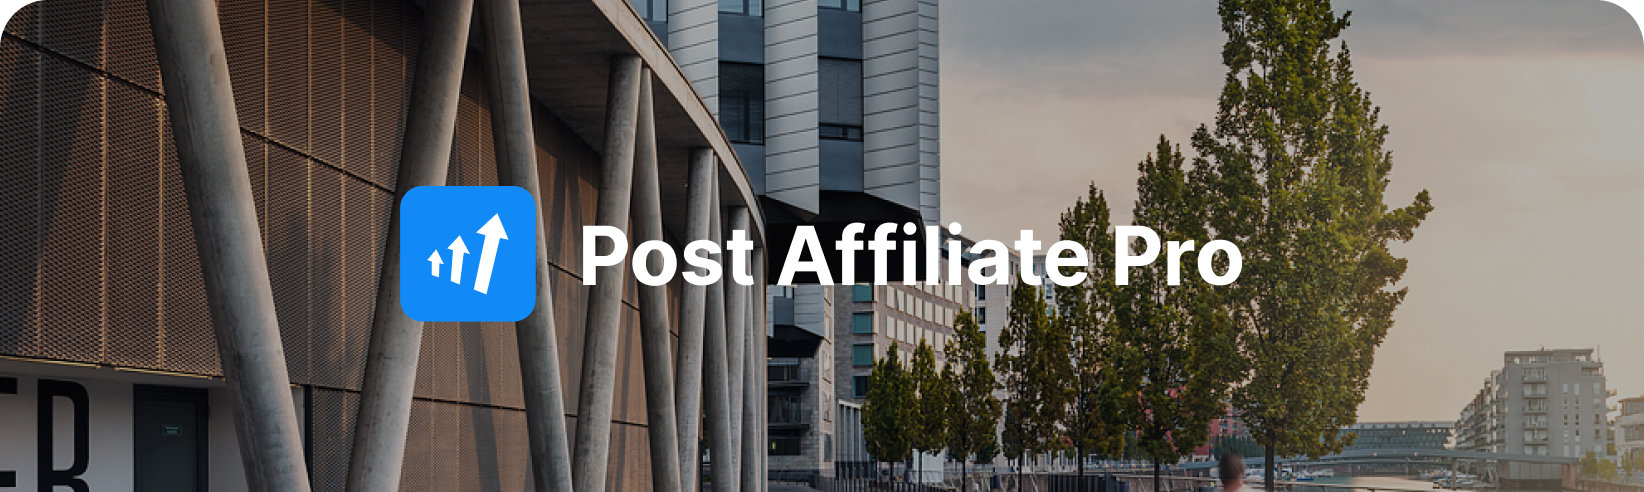 Read Post Affiliate Pro's story